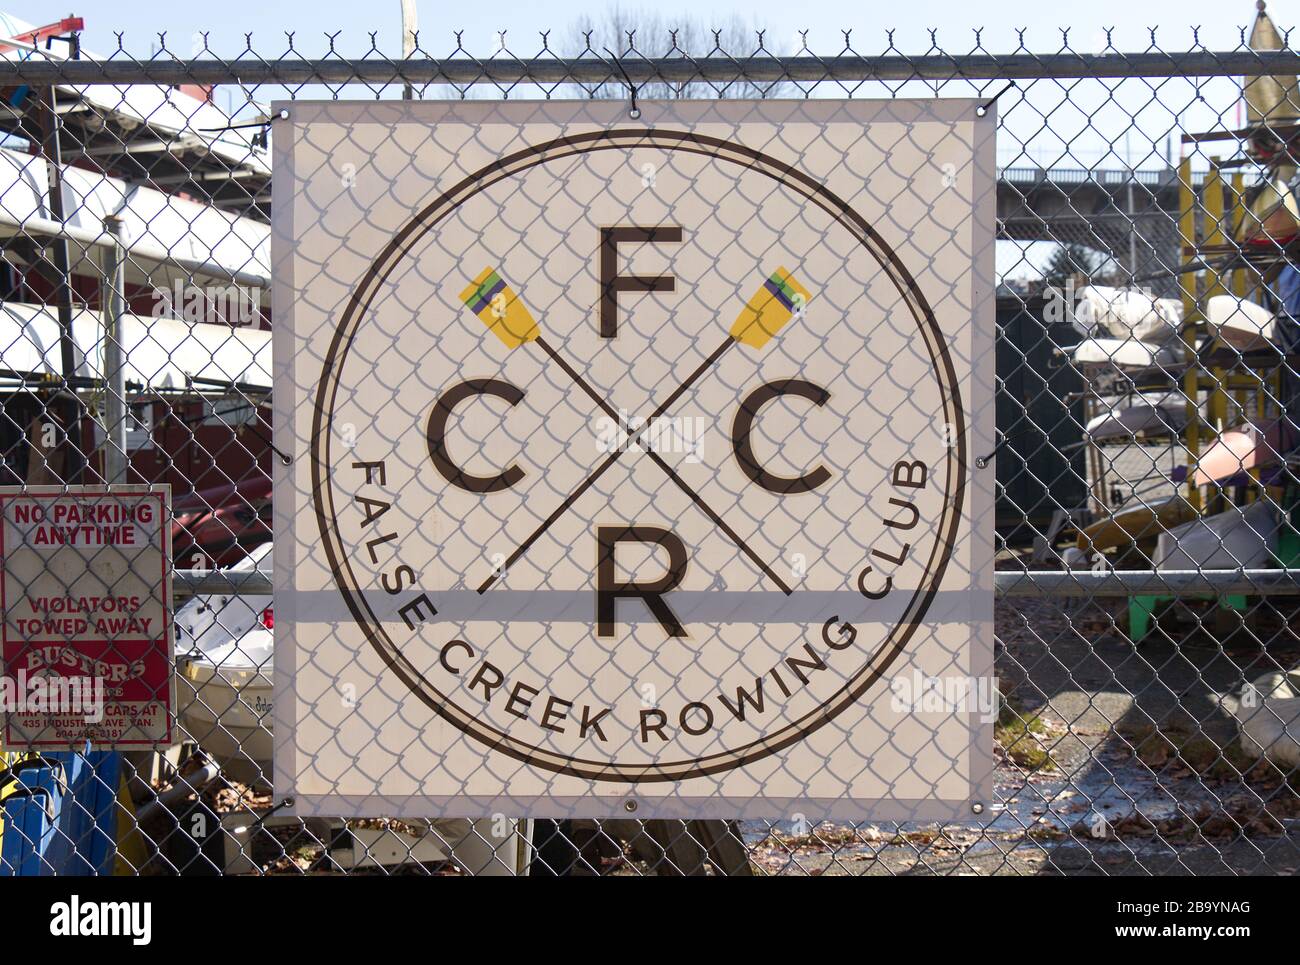 Vancouver, Canada - February 29, 2020: View of sign on the fence False Creek Rowing Club Stock Photo